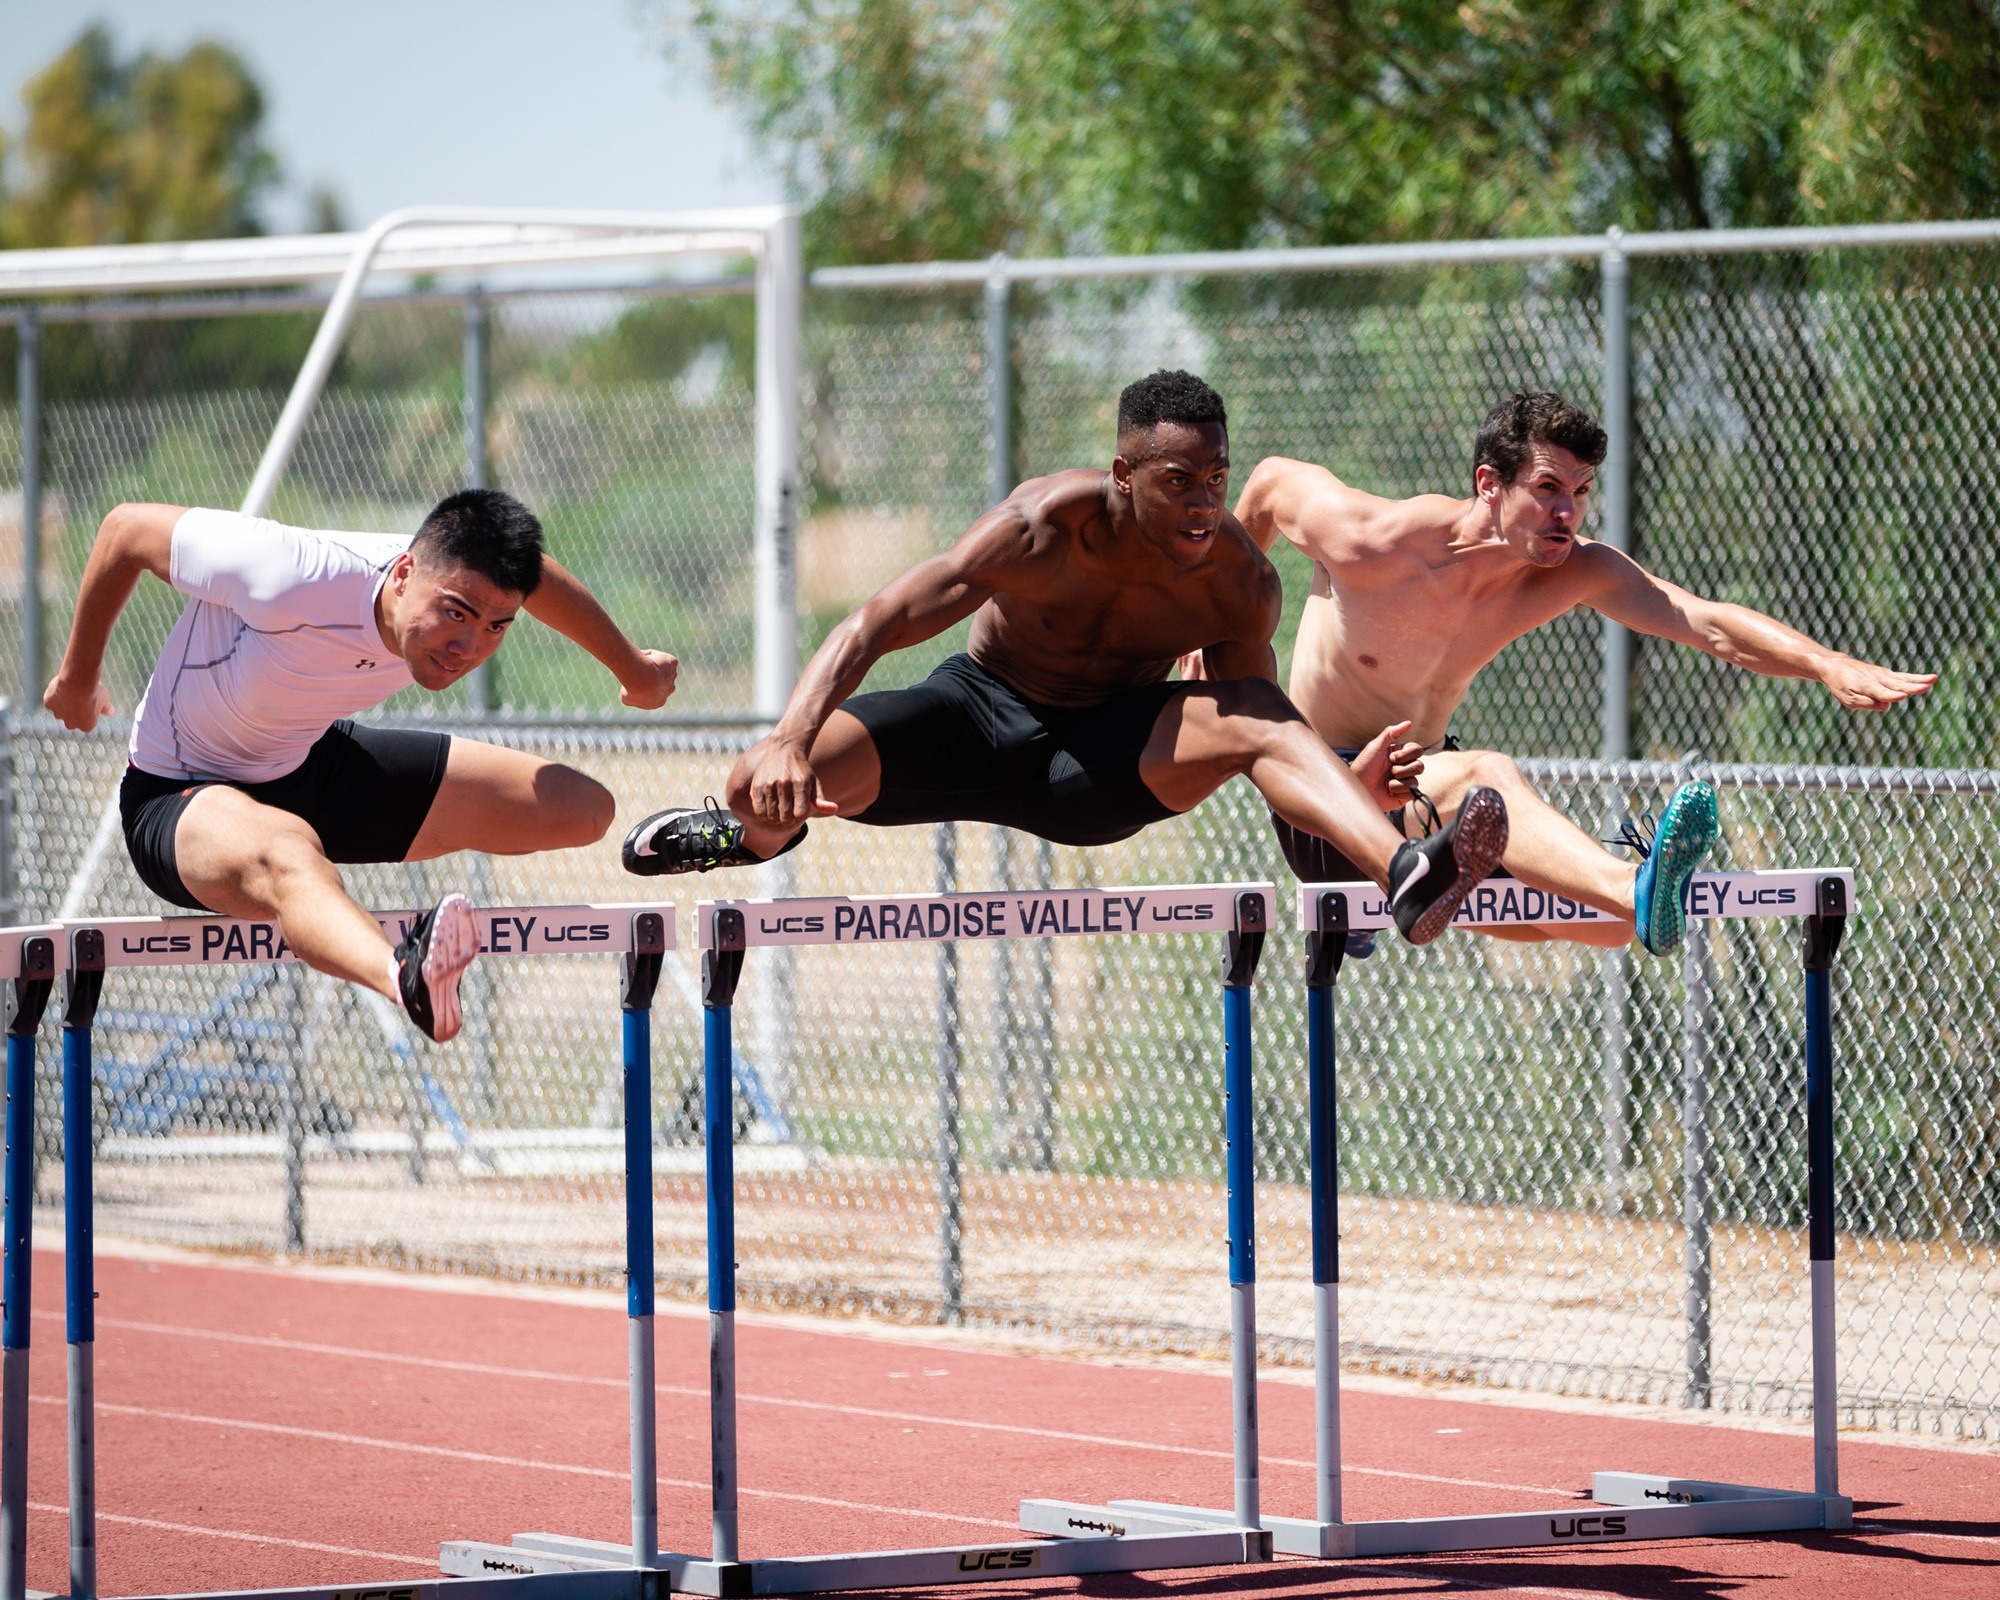 Hurdling: Running competition, Sprint races with hurdles, Track and field athletics, ALTIS, Trail running events, Trail races in scenic places. 2000x1600 HD Background.